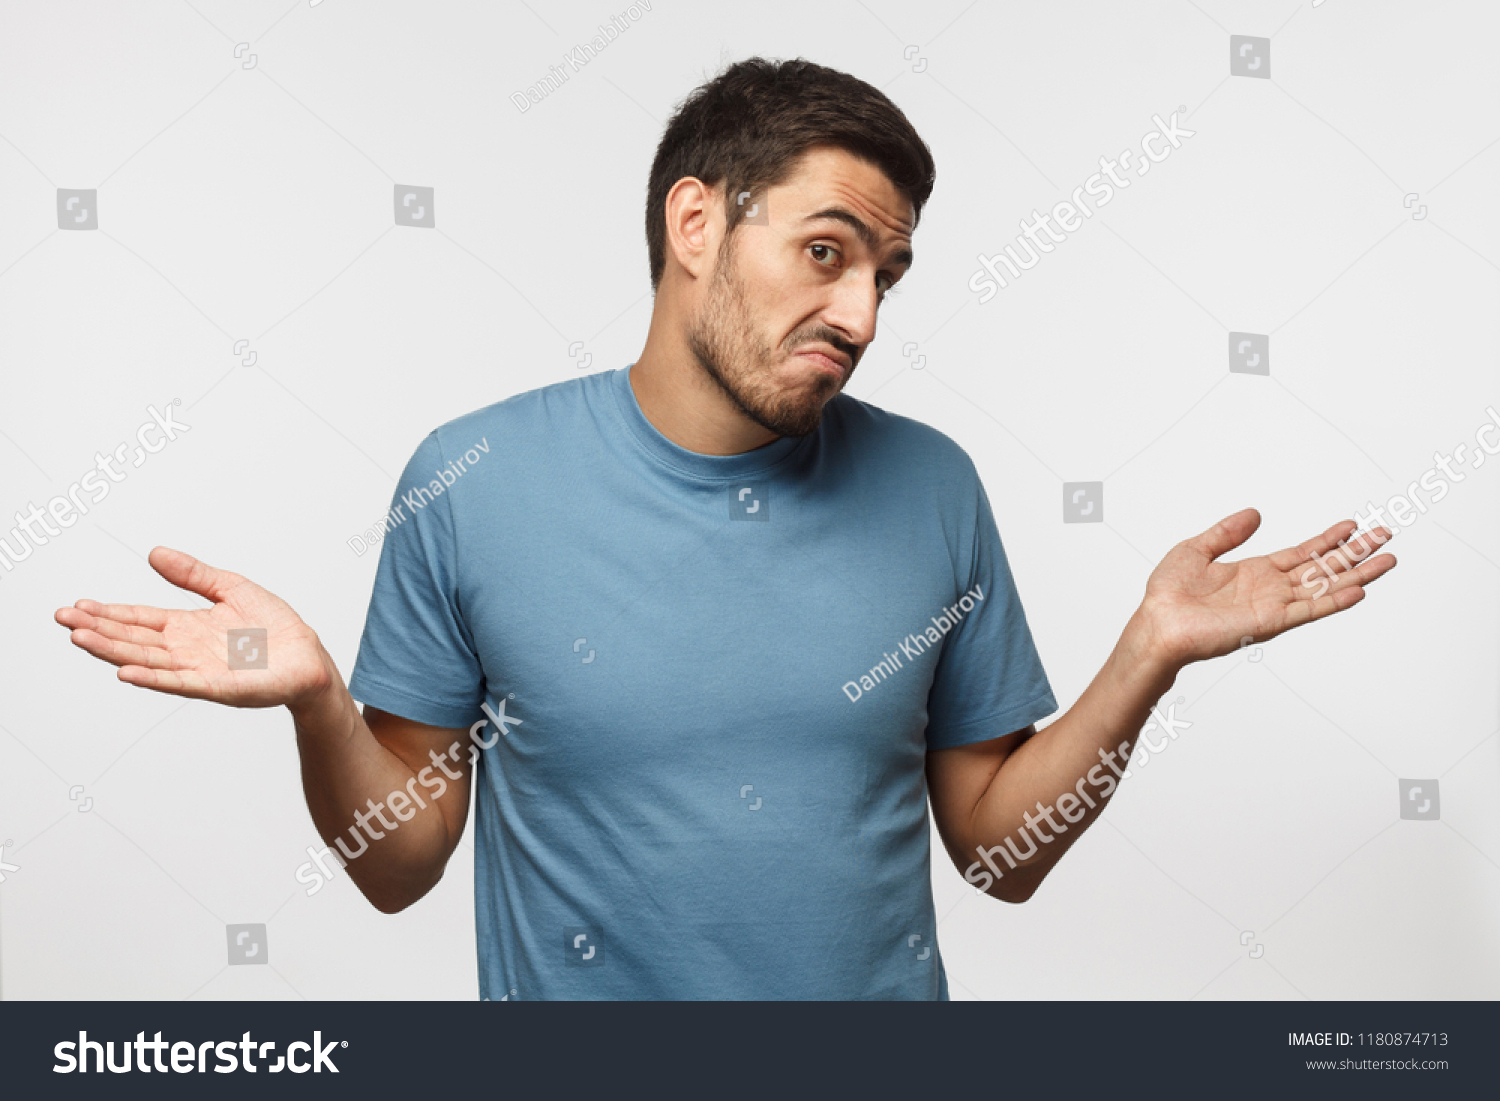 Young man isolated on gray background, showing helpless gesture with arm and hands, mouth curved as if he does not know what to do. I don't know.  #1180874713